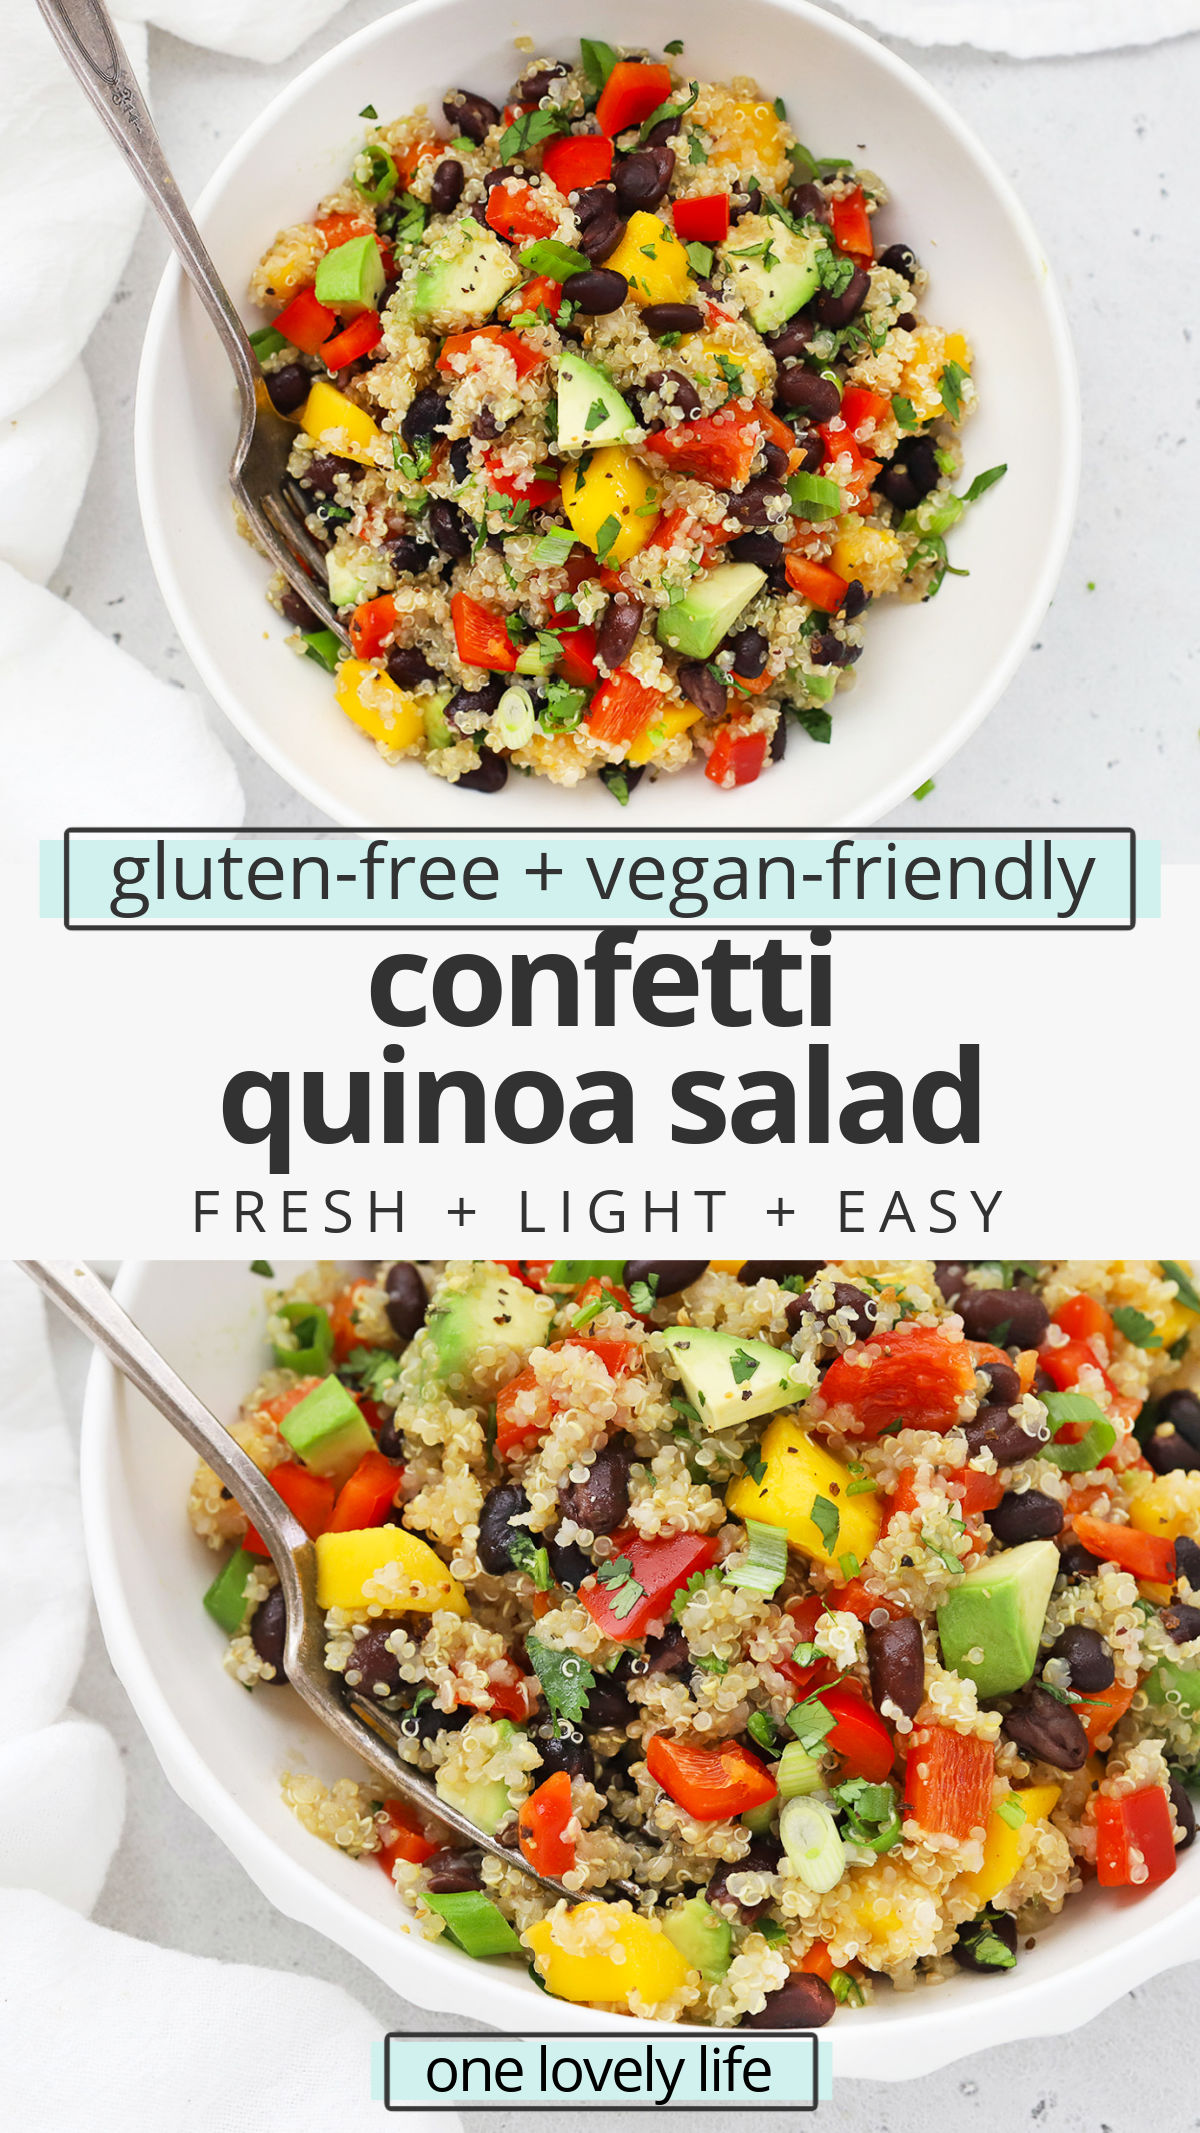 Confetti Quinoa Salad with Lime Dressing- One of my family's all time favorite recipes, this colorful healthy quinoa salad is perfect for picnics, potlucks, barbecues, lunches, meal prep, and more! (Gluten-Free, Vegan) // Healthy Quinoa Salad Recipe // Tex-Mex Quinoa Salad #quinoasalad #glutenfree #vegan #salad